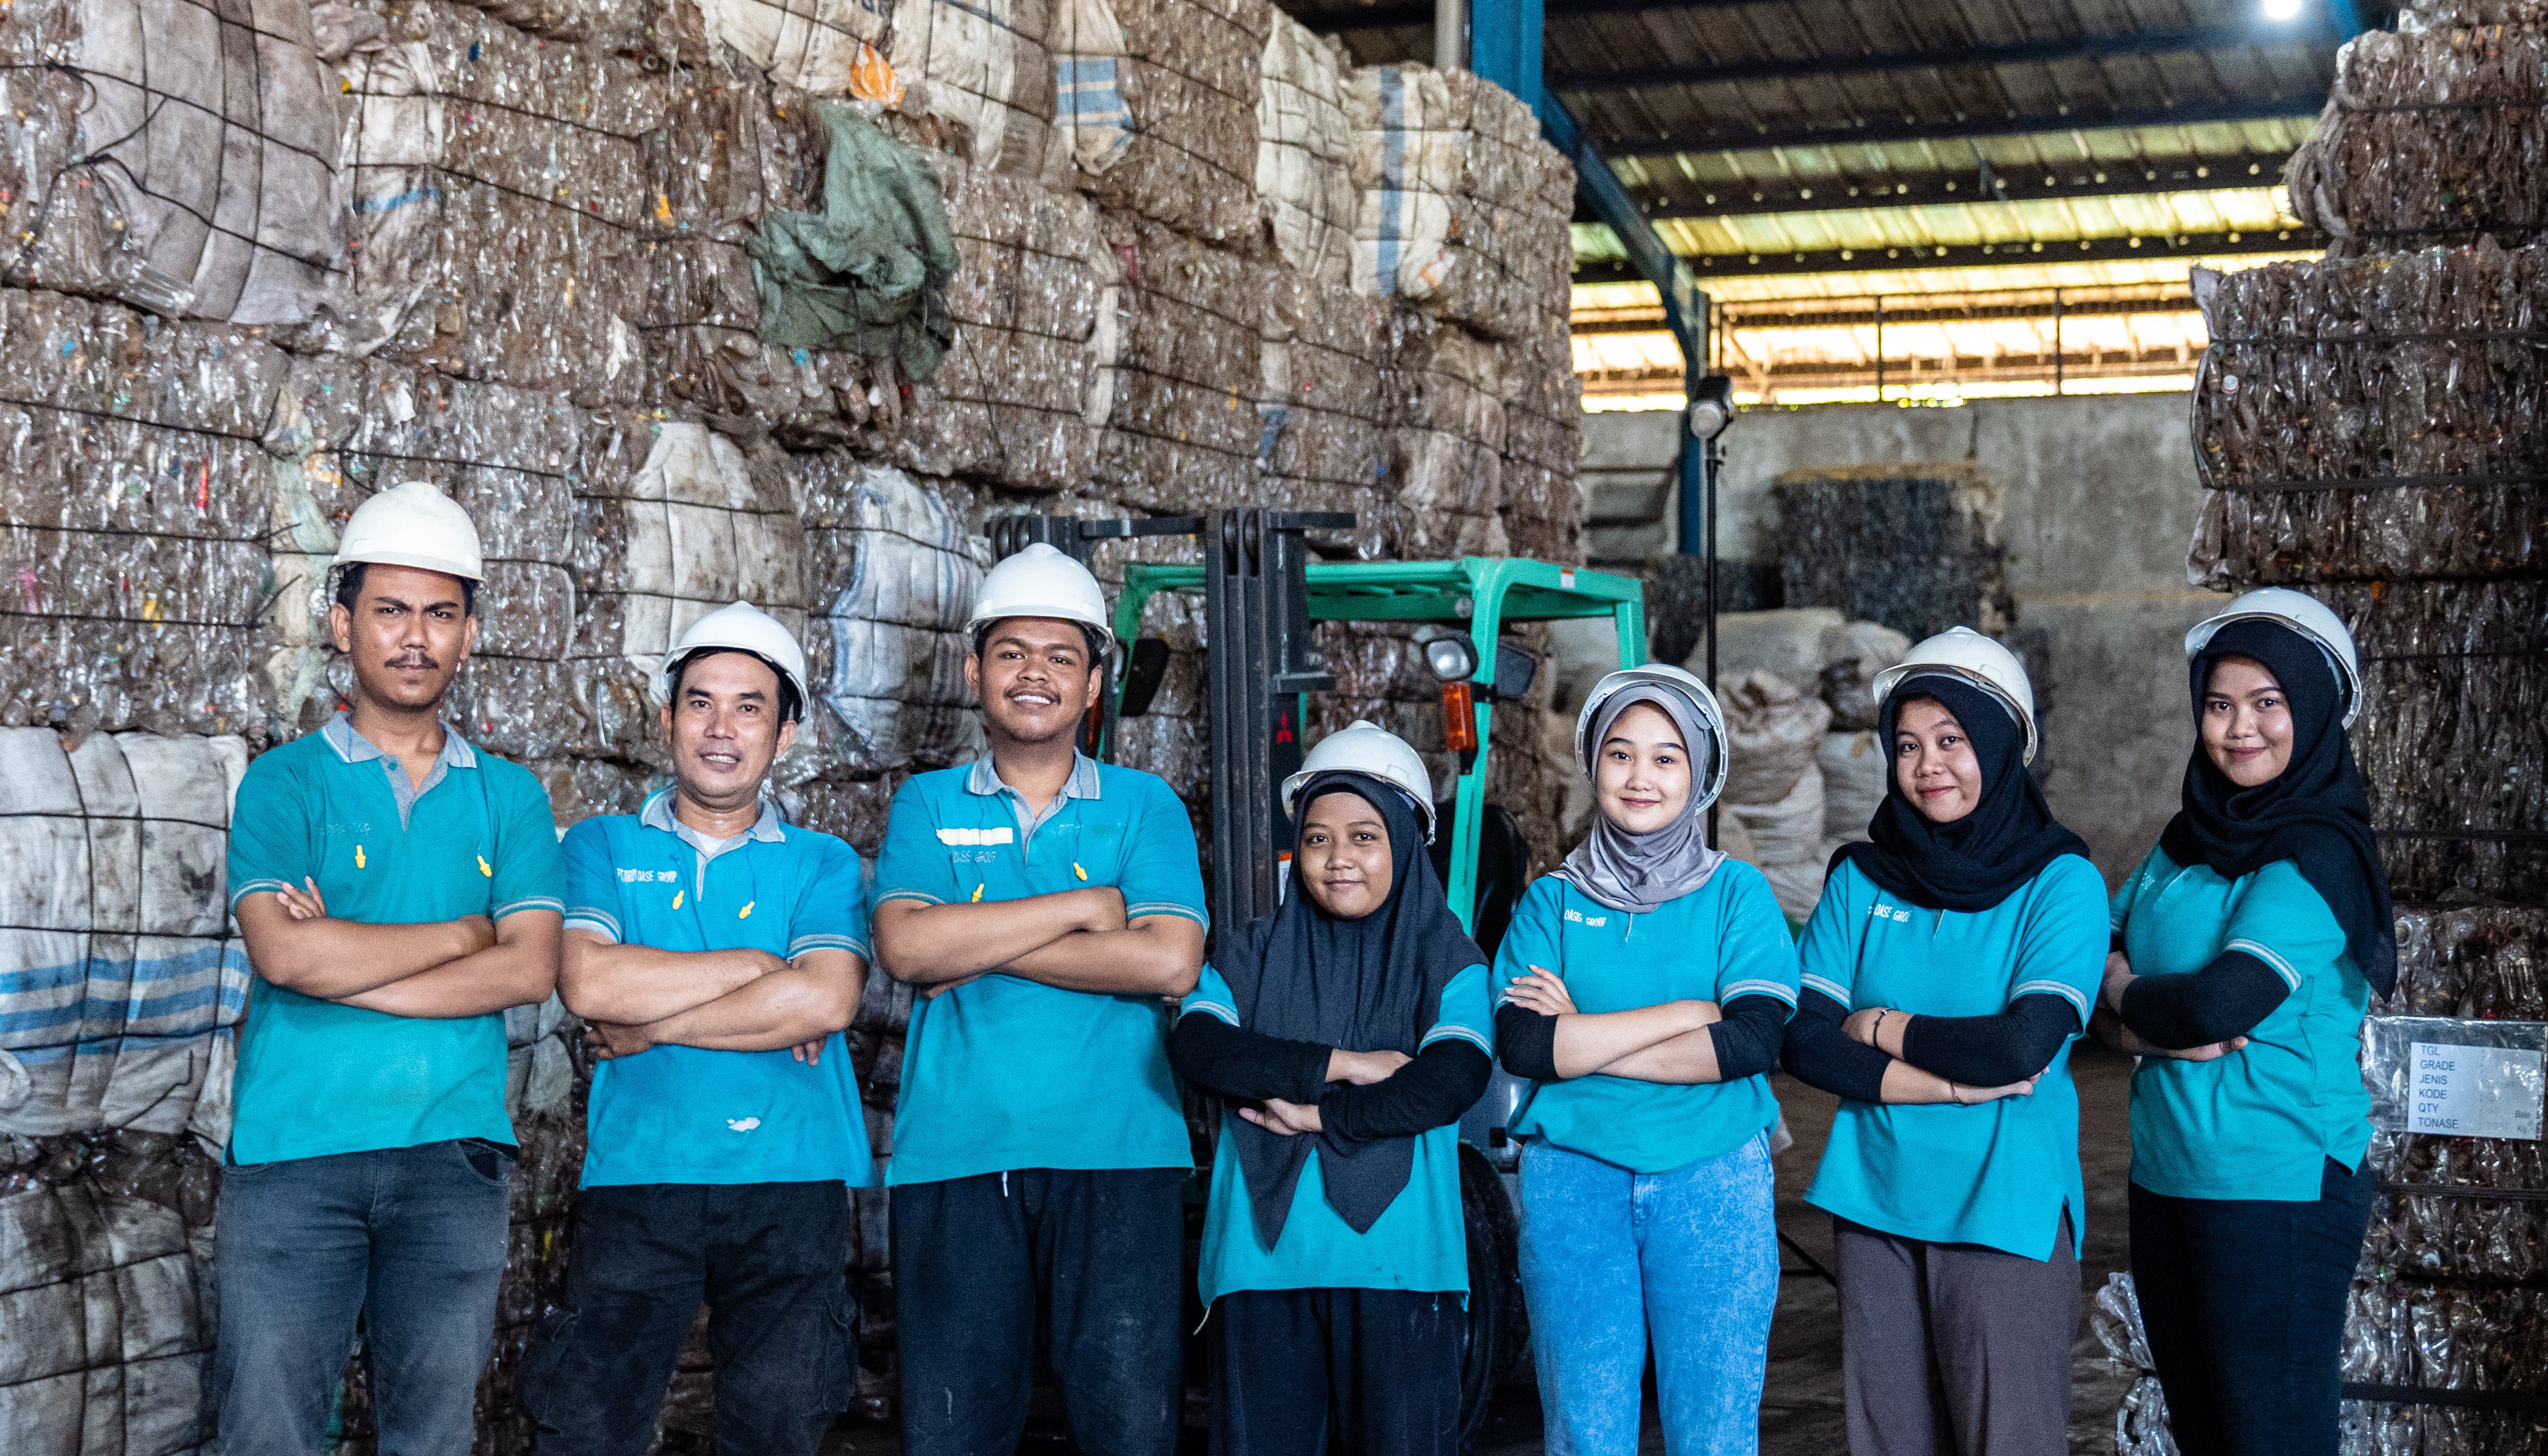 Read Indonesia: Tridi Oasis Converts Plastic From Waste to Resource by USAID Private Sector Engagement